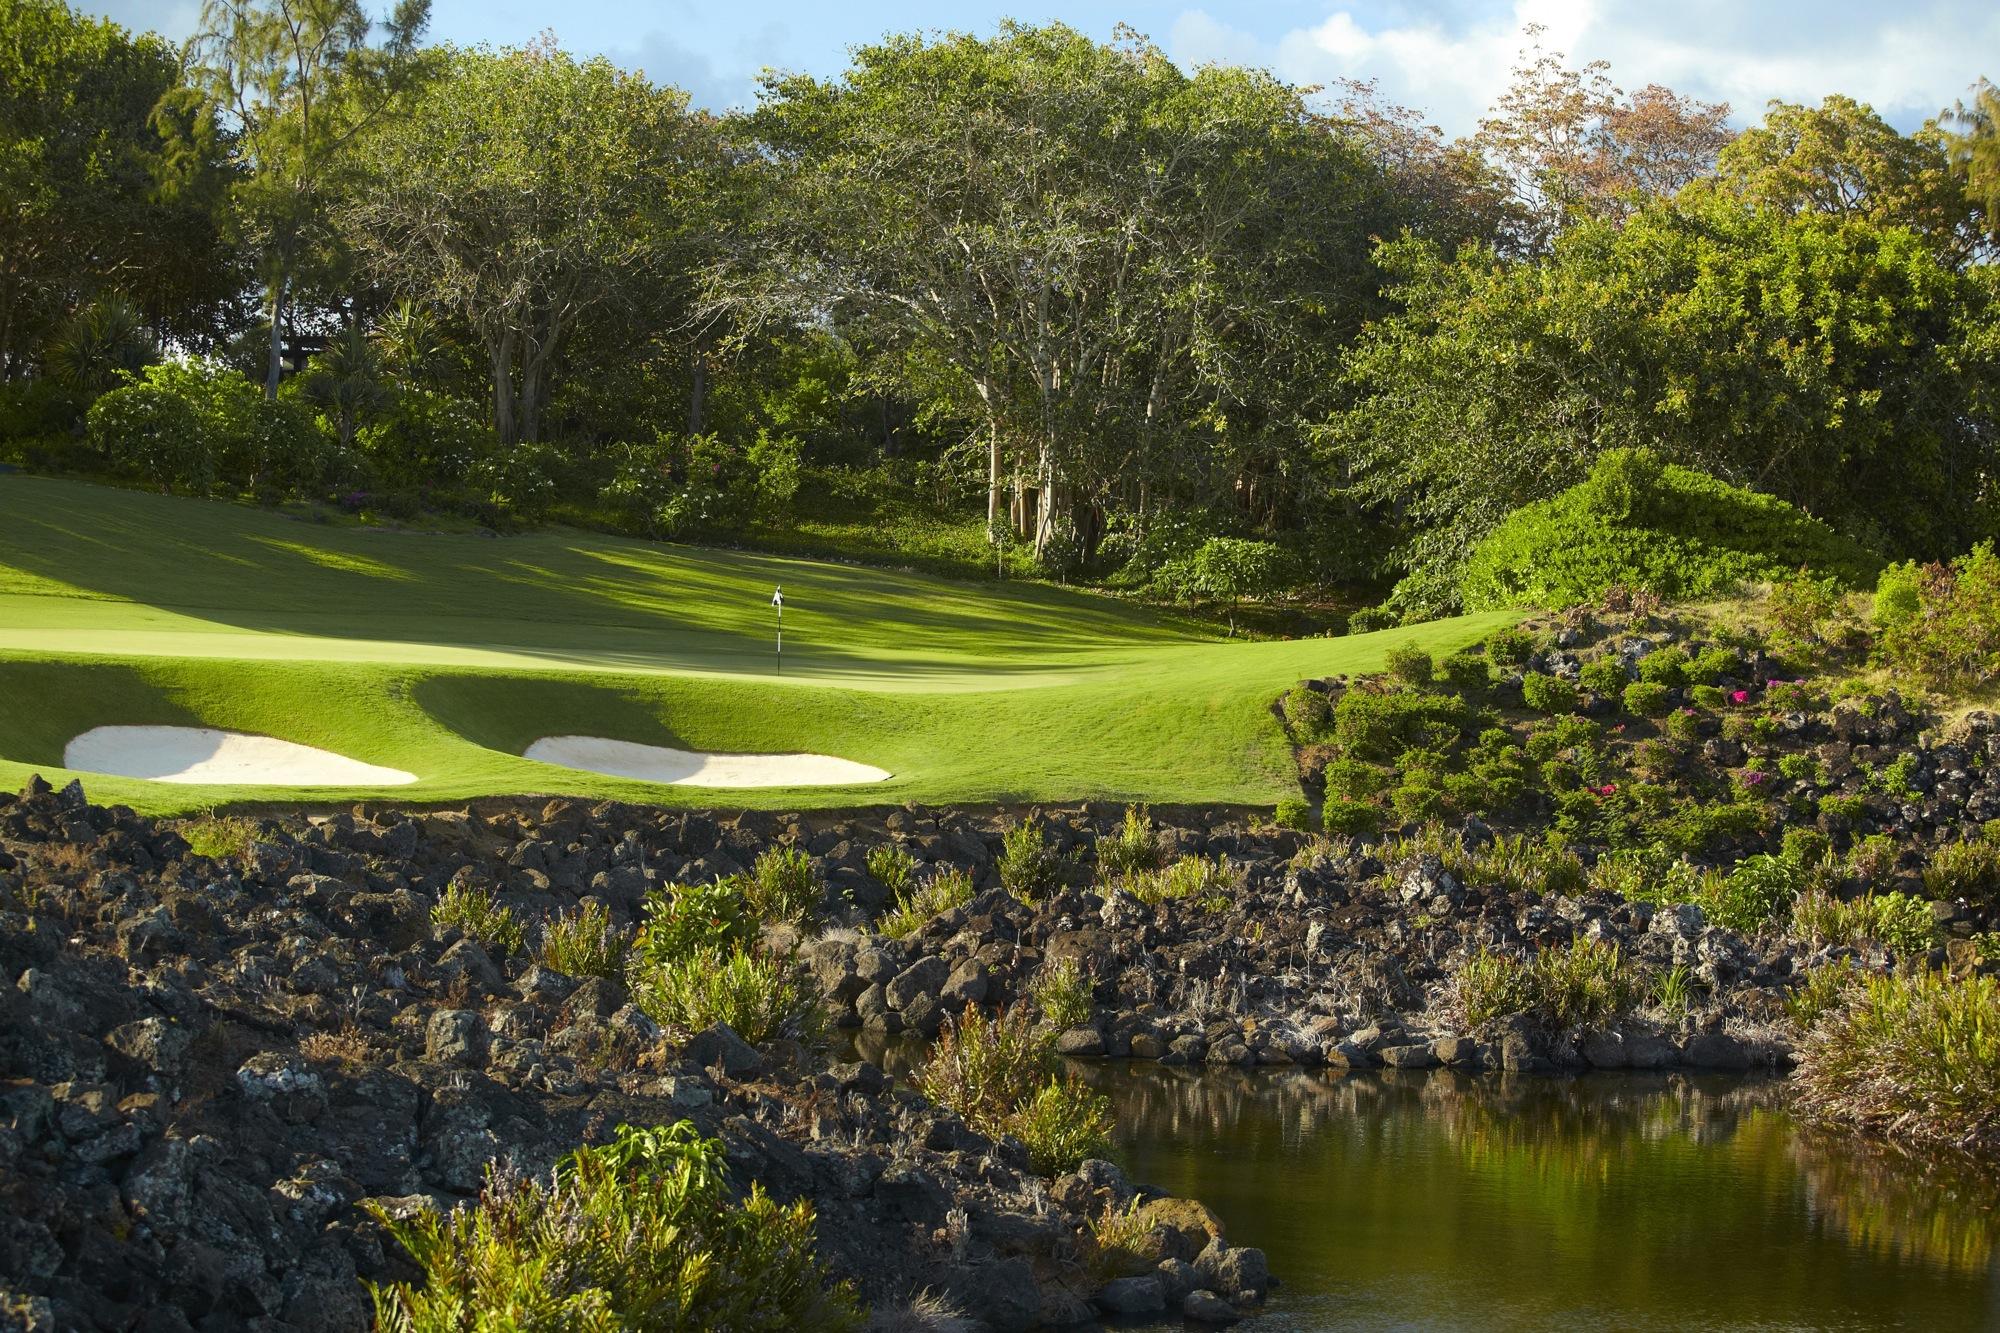 The Anahita by Ernie Els's picturesque golf course situated in sensational Mauritius.